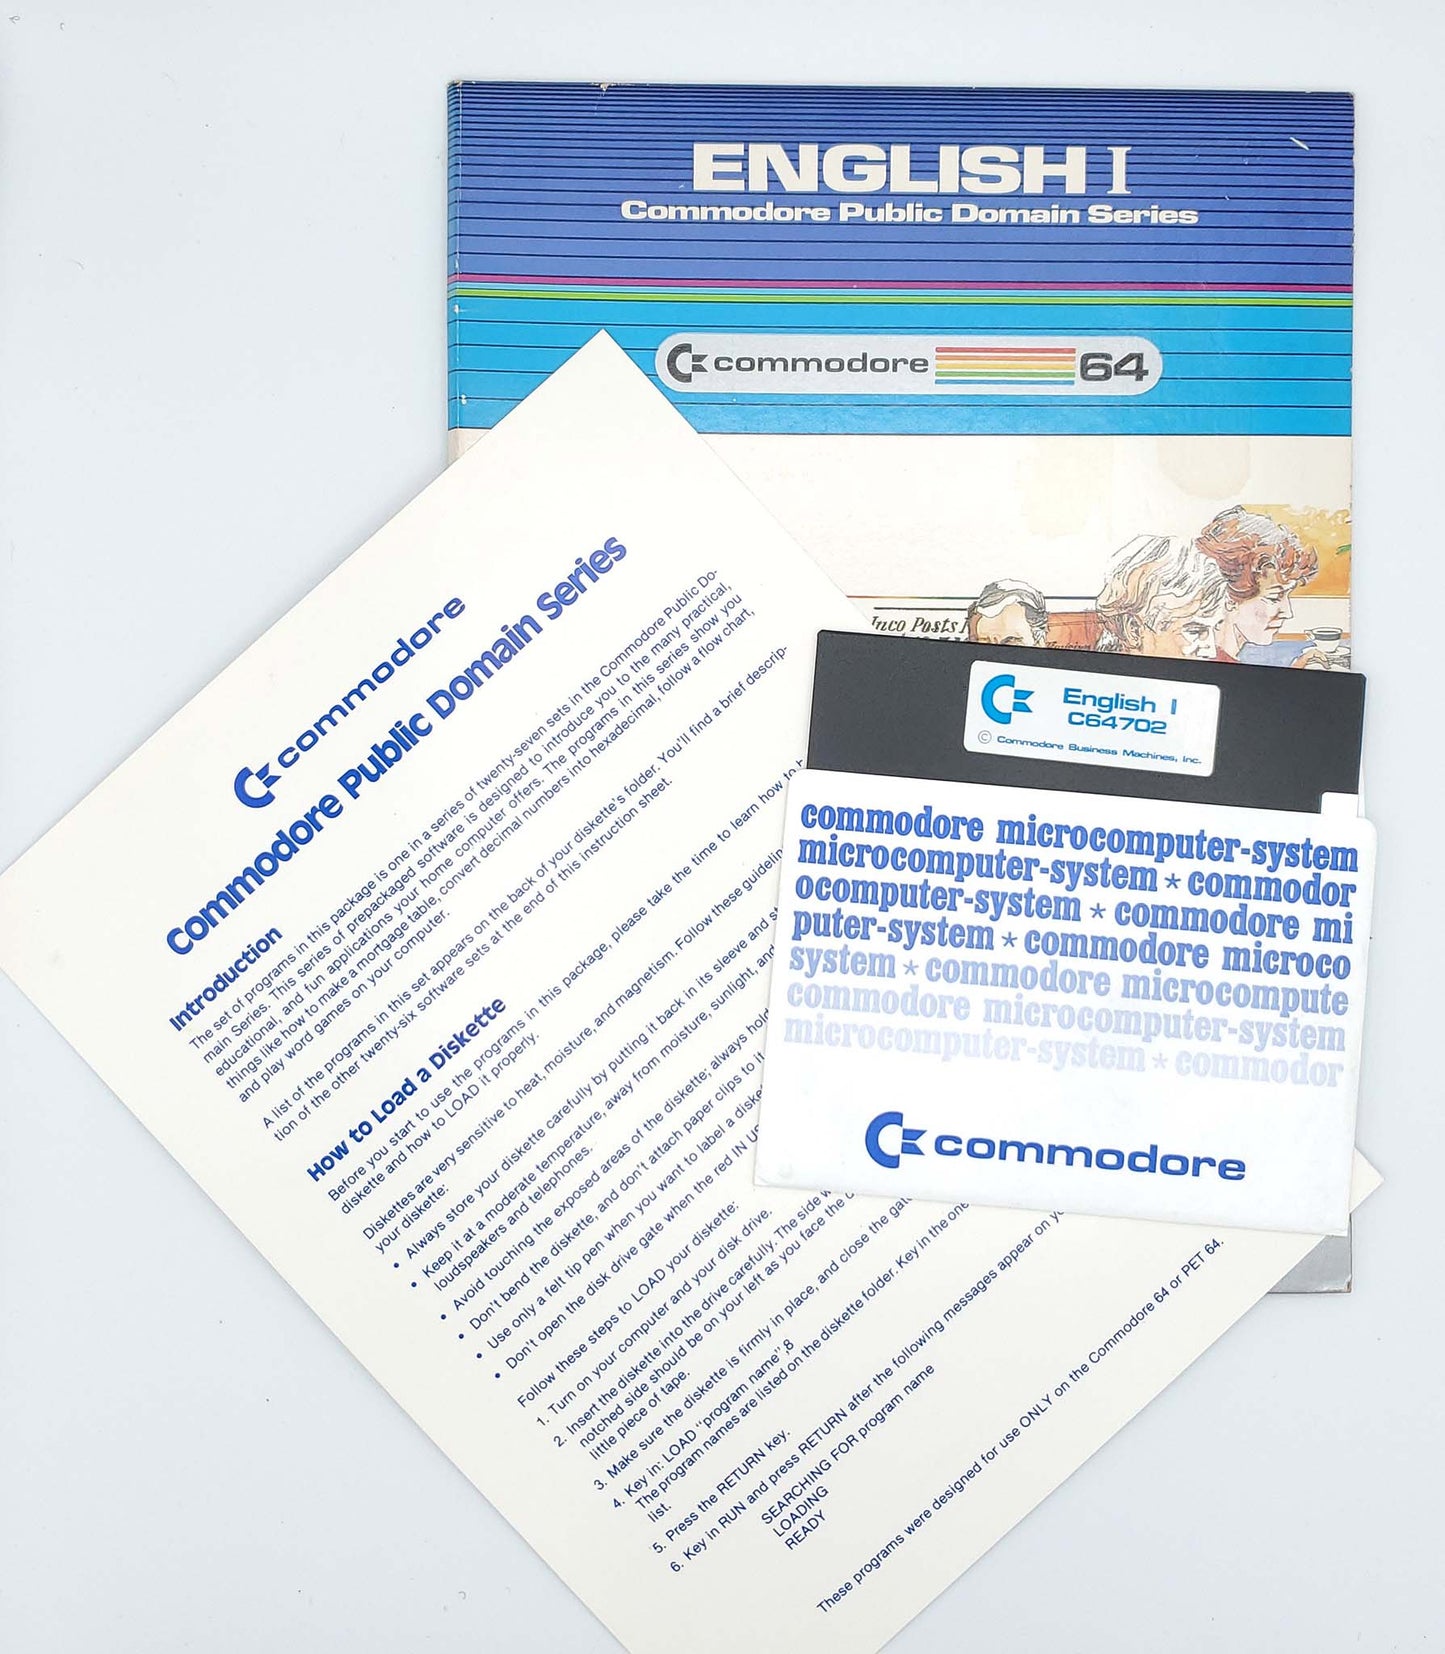 English I from the Commodore Public Domain Series